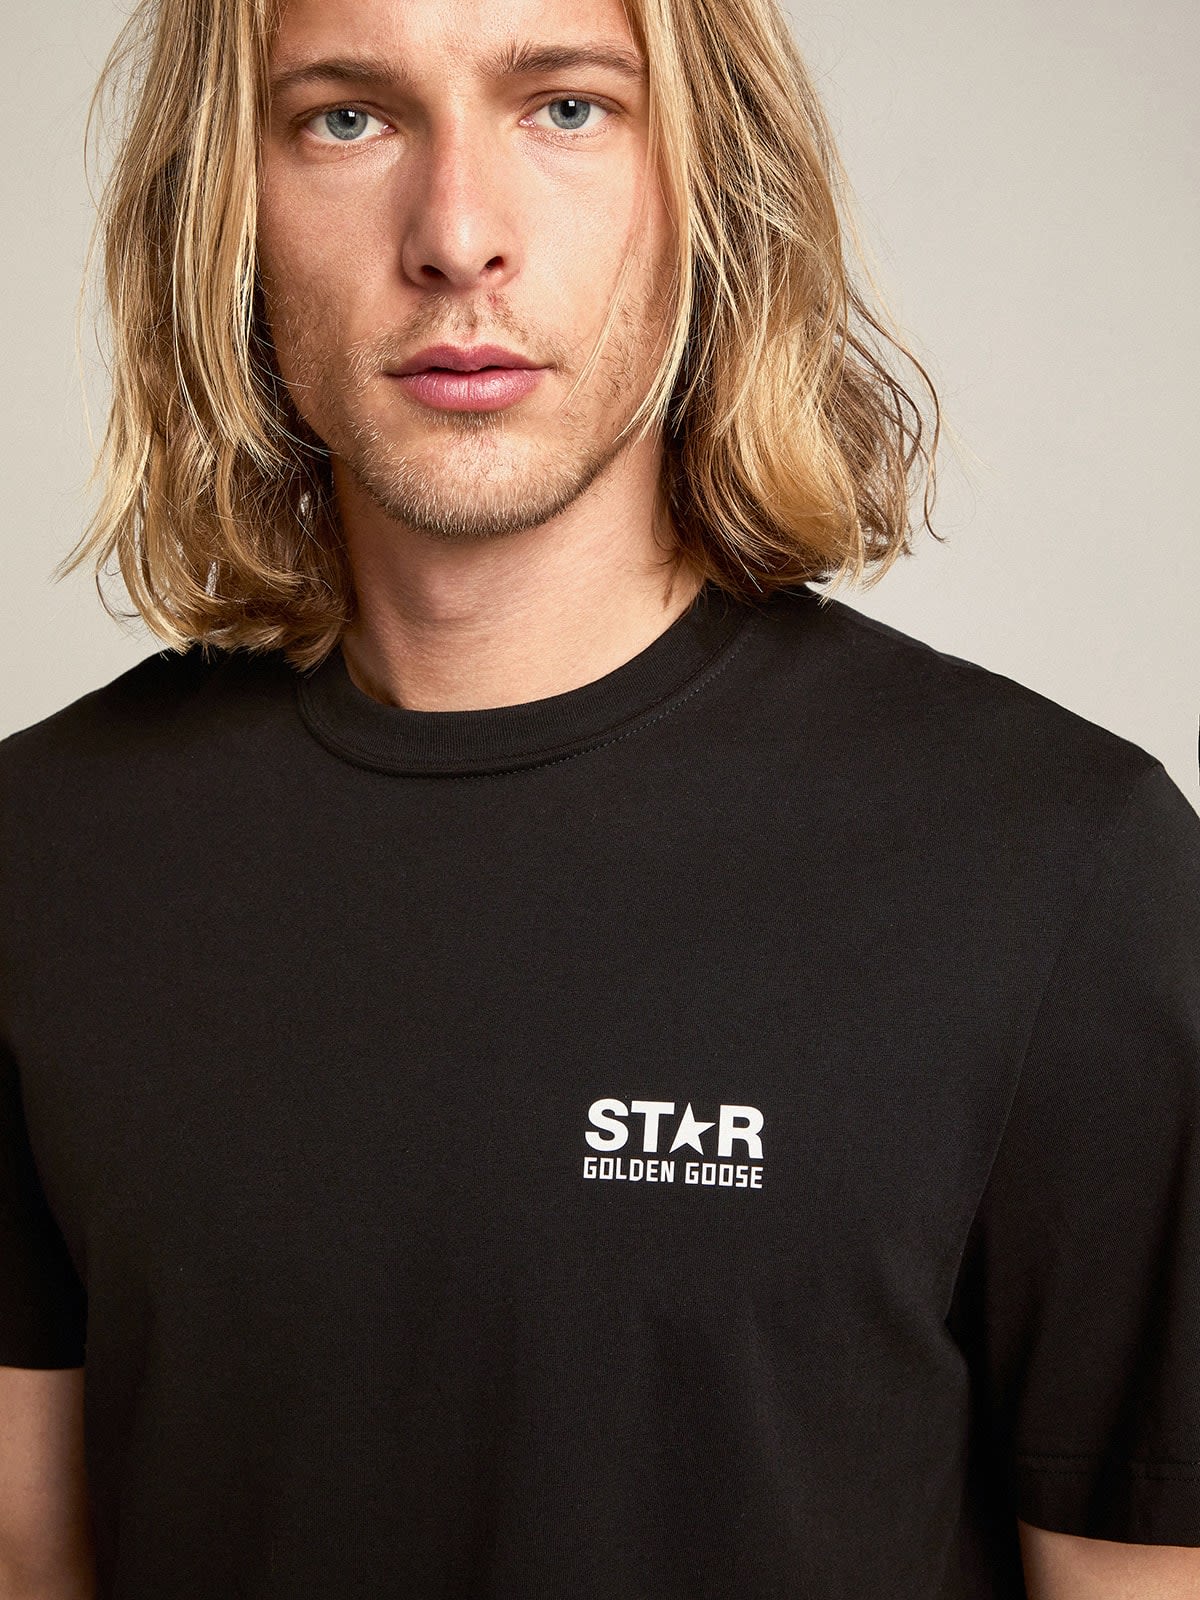 Golden Goose - Men's black T-shirt with contrasting white logo and star in 